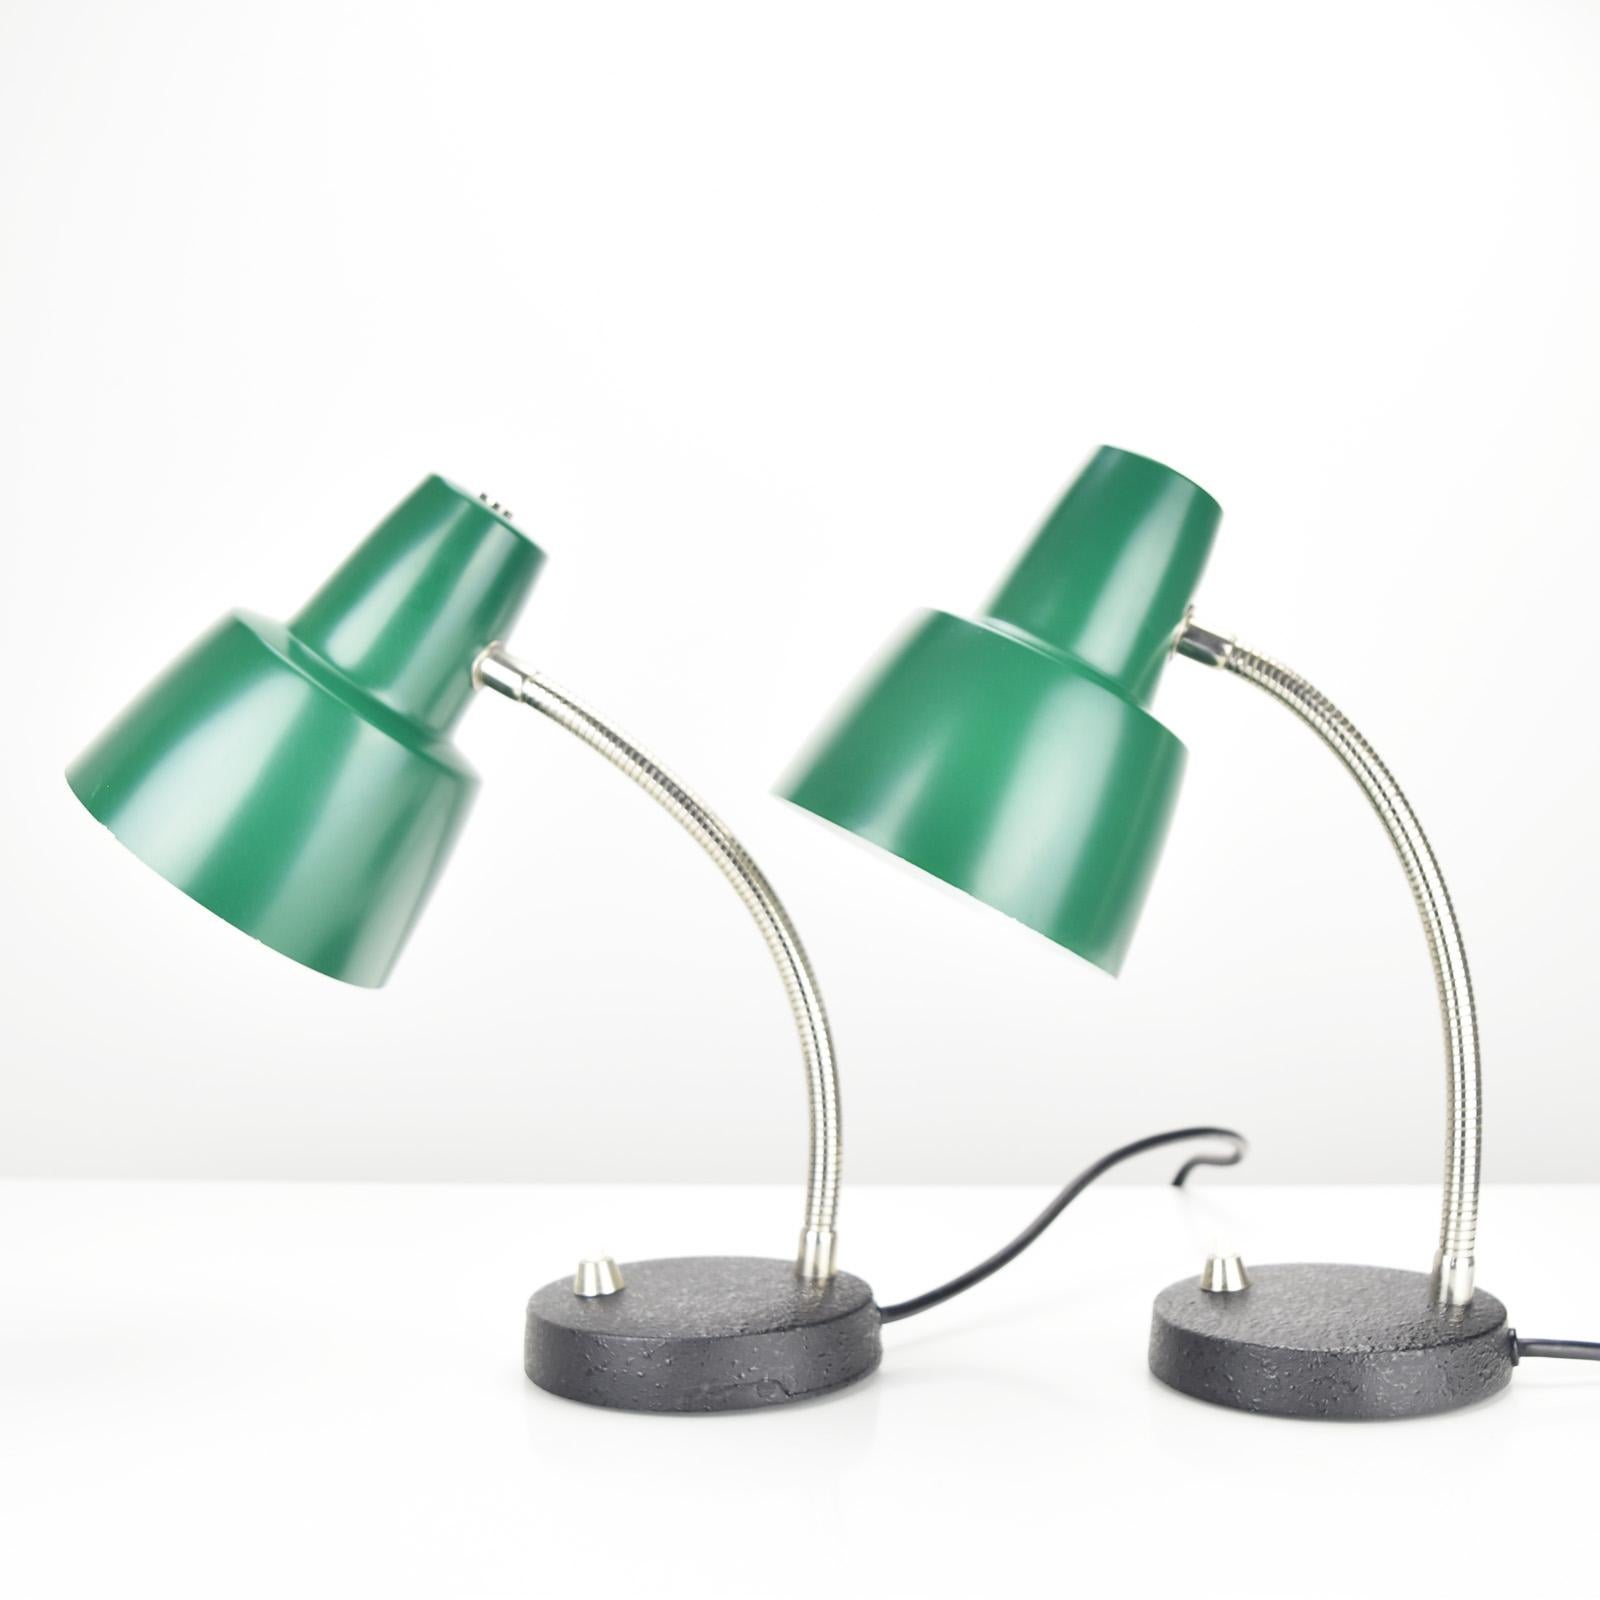 Vintage Pair of Bed Side Table Lamps by Hillebrand 1960s German Green Lacquered For Sale 2